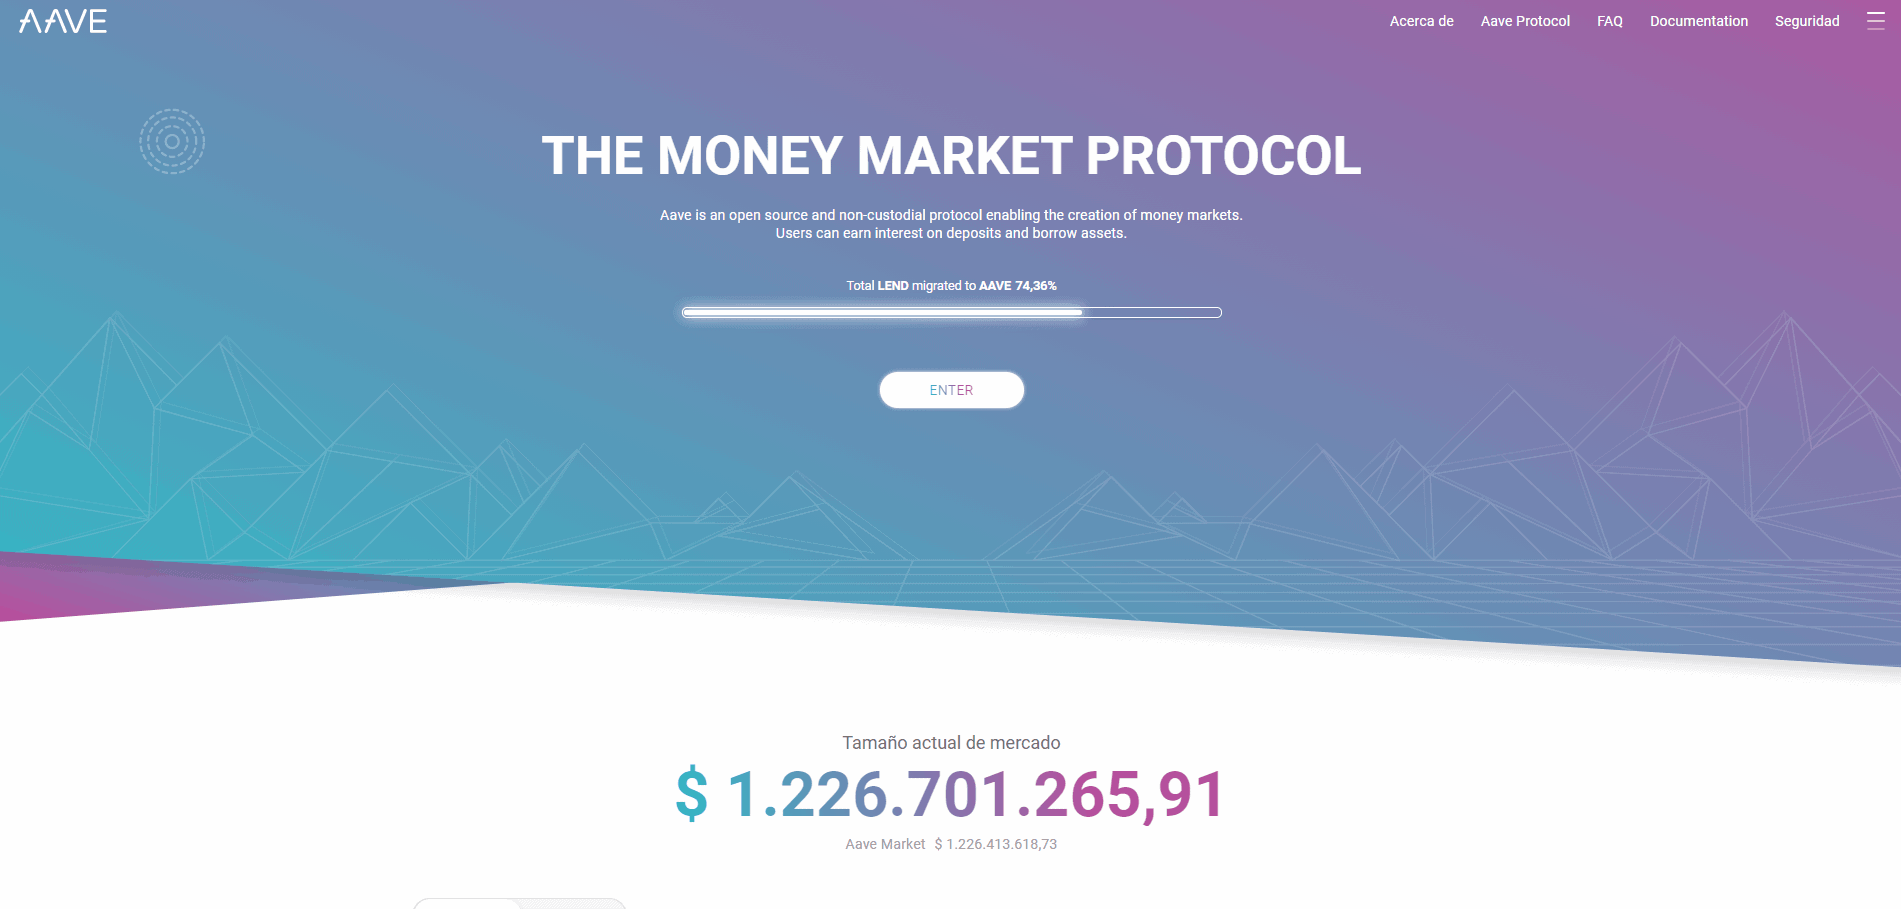 AAVE protocol